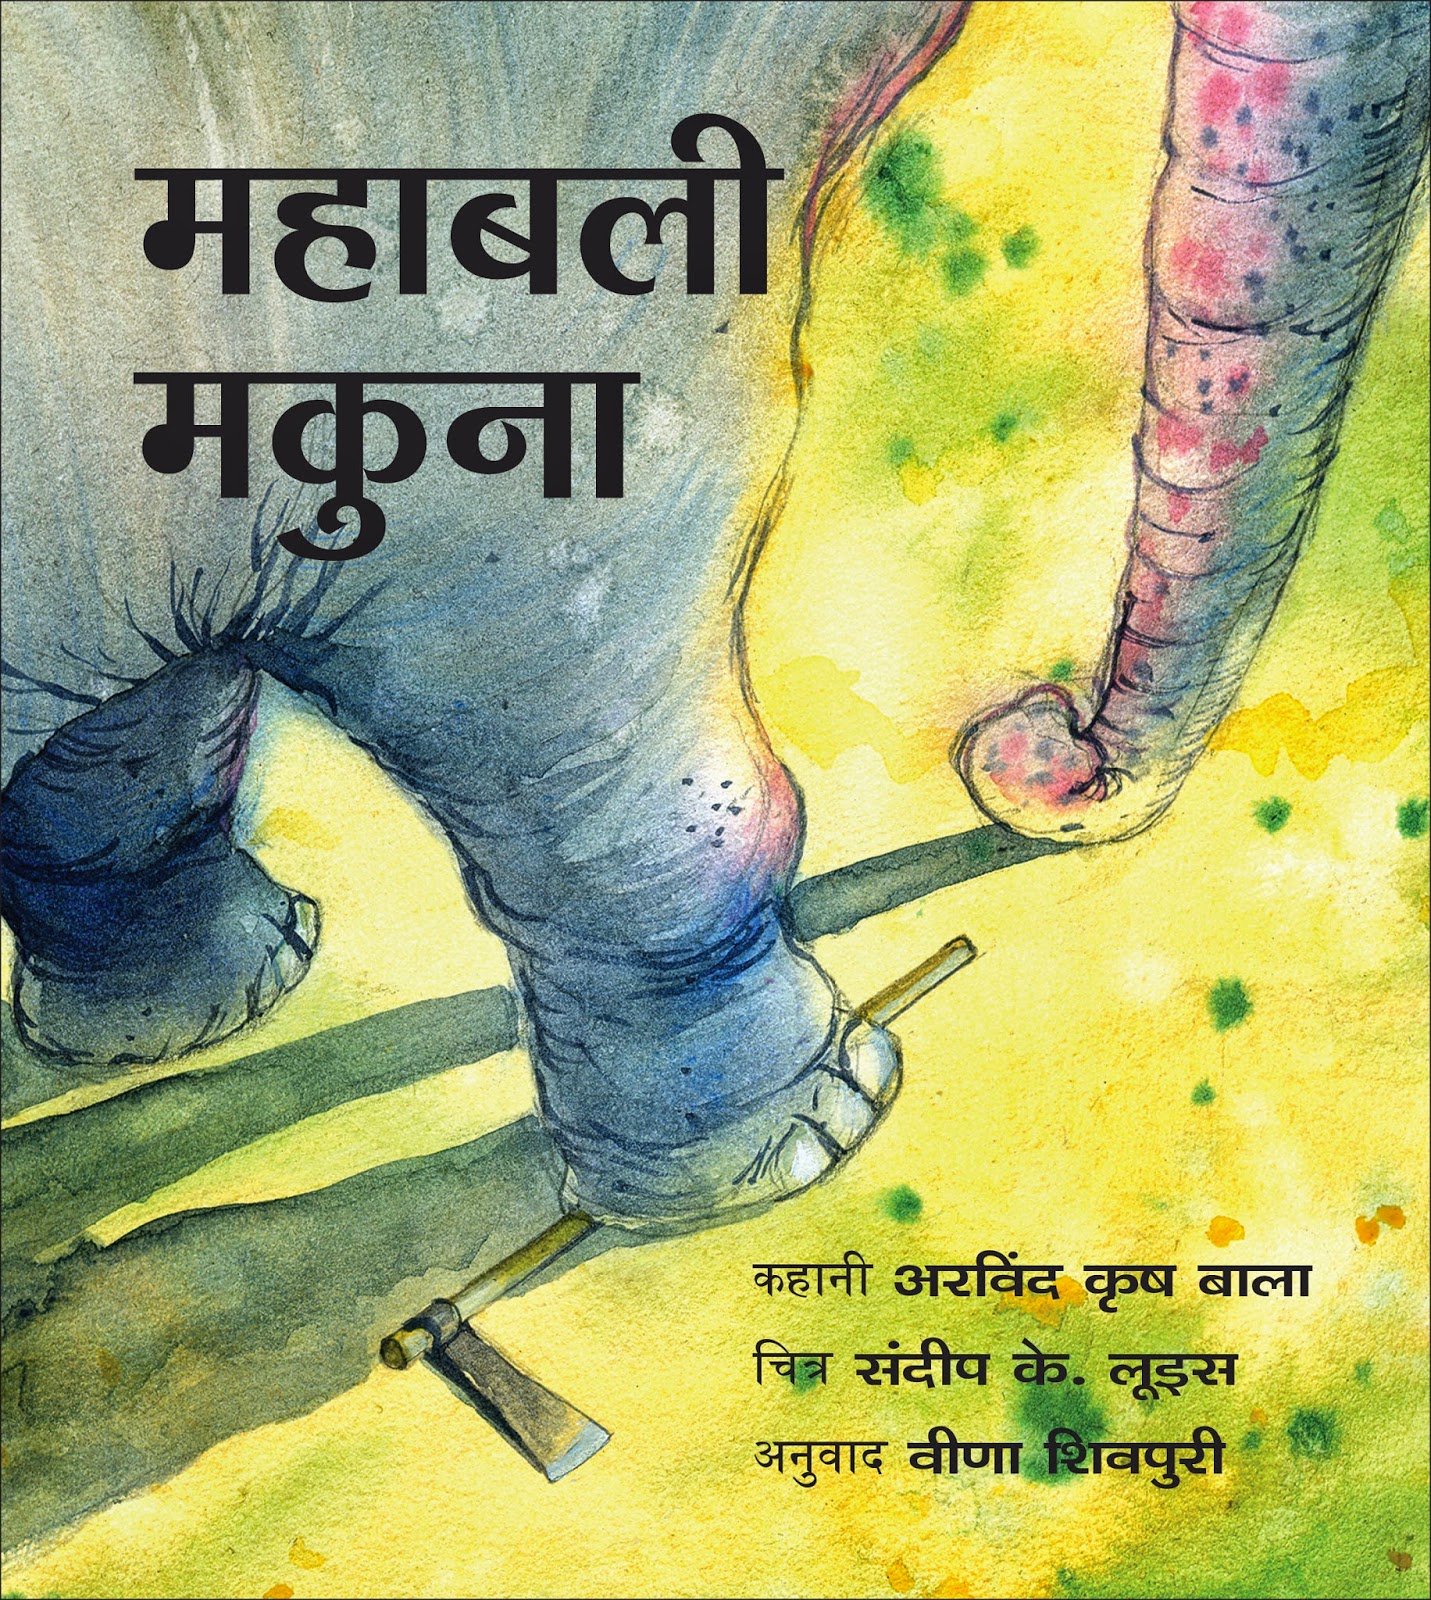 http://tulikabooks.com/our-books/picture-books/general-picture-books/magnificent-makhna